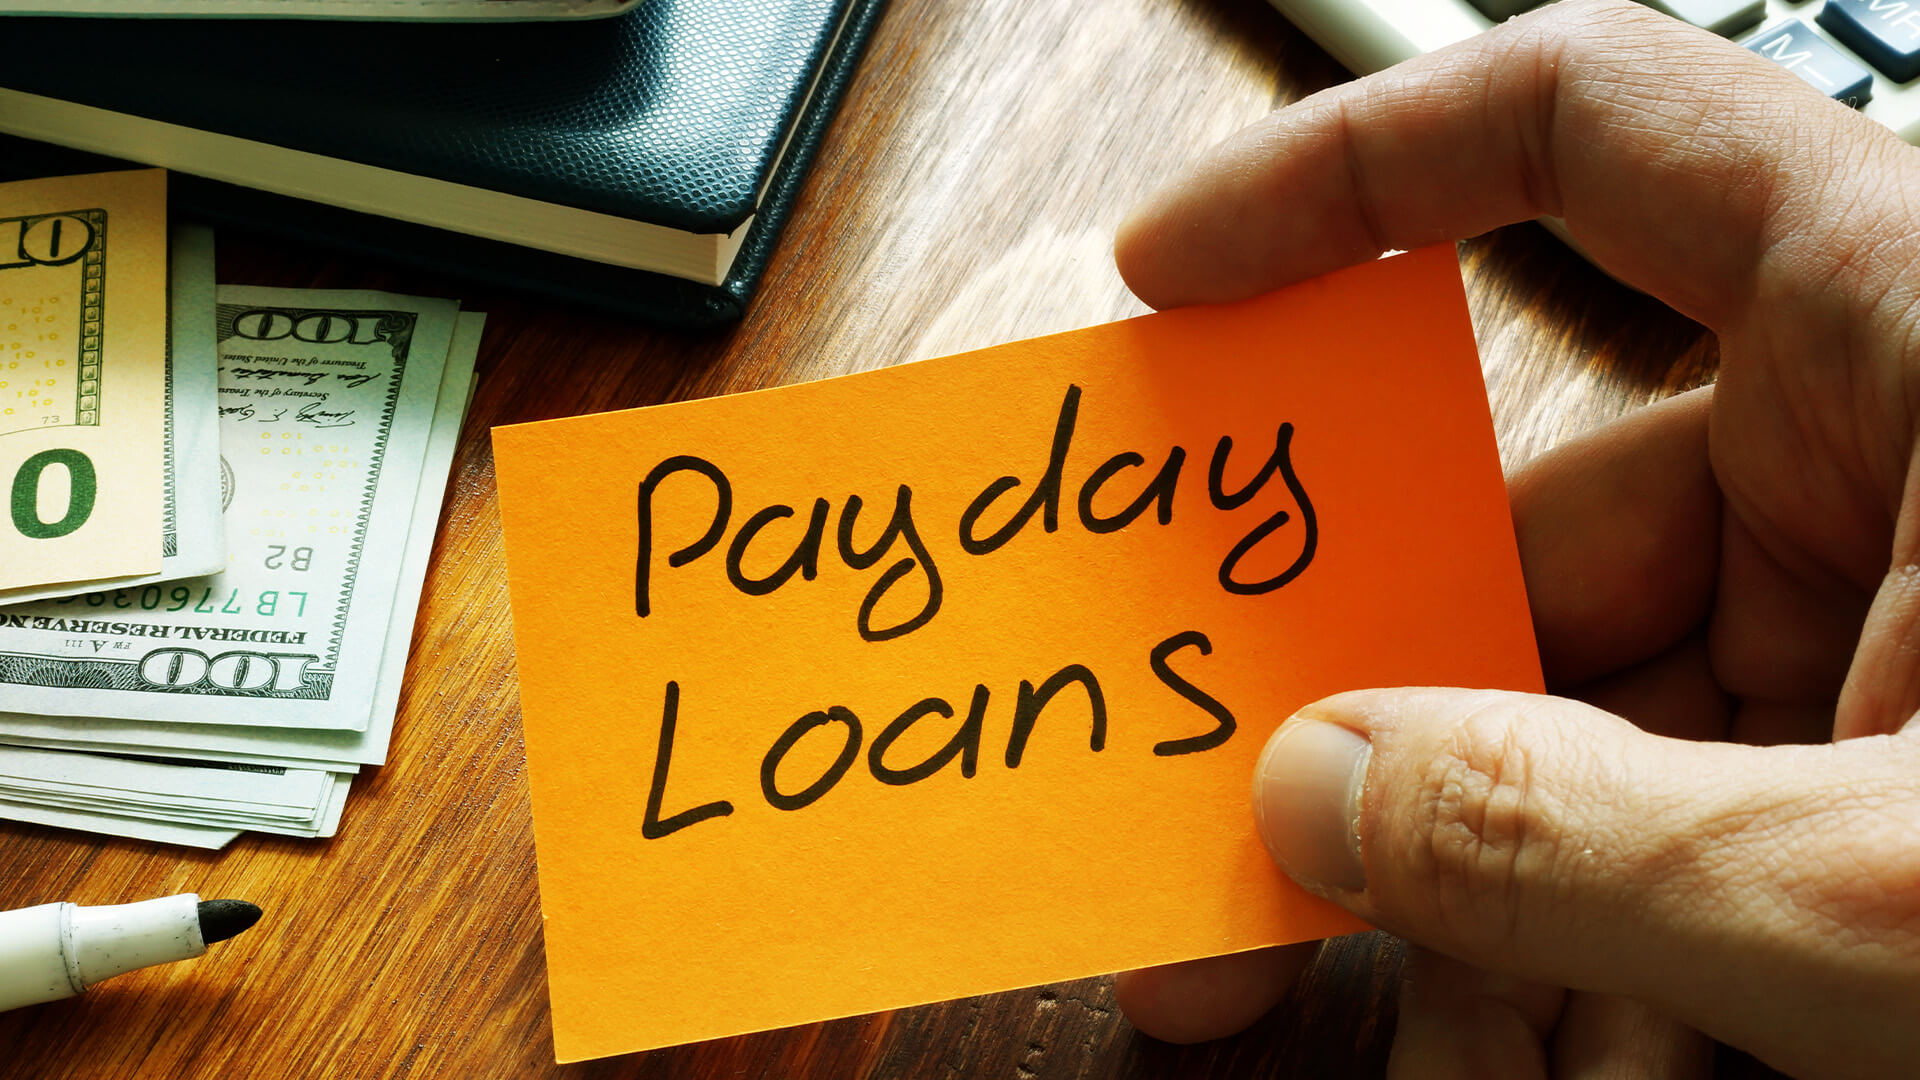 How to Get out of Payday Loans Legally